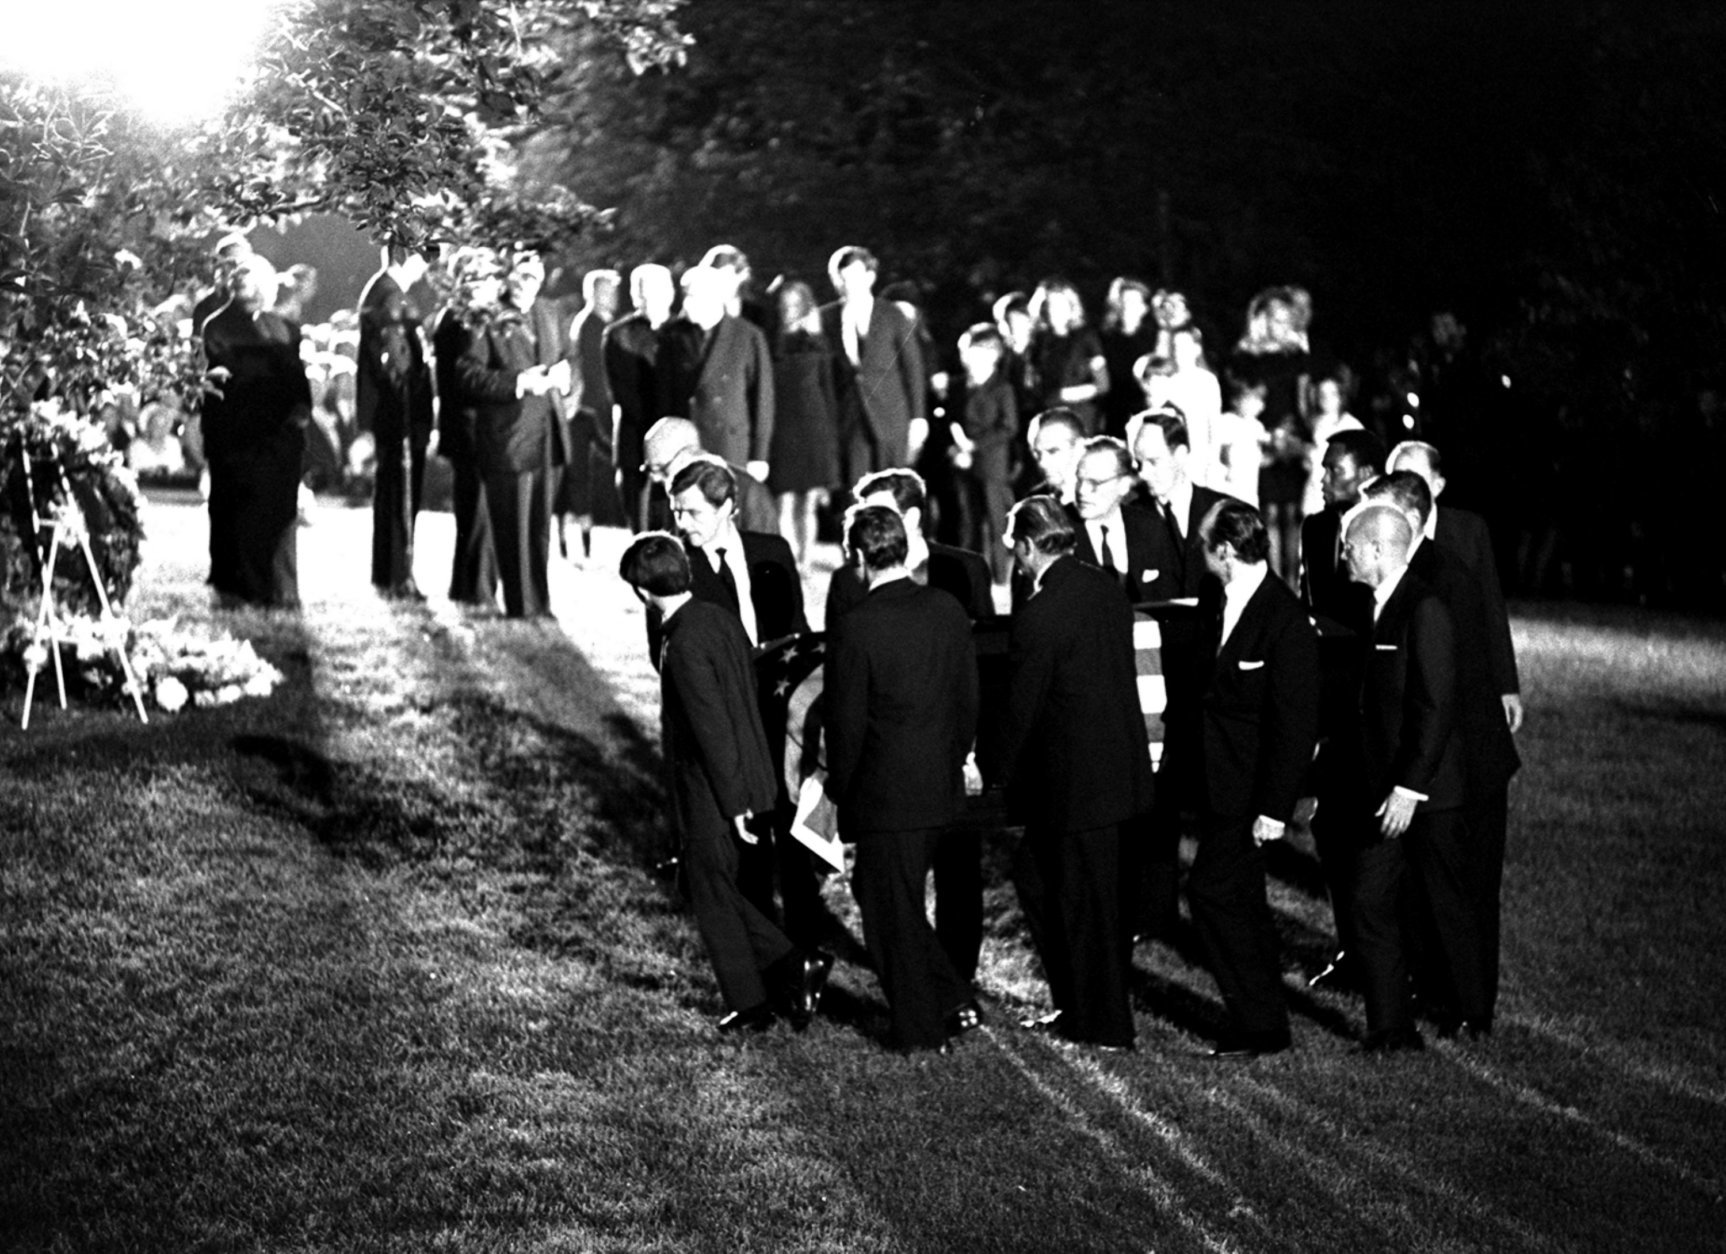 The casket of Robert F. Kennedy is carried to the gravesite at Arlington National Cemetery, June 8, 1968.  The pallbearers are led by Kennedy's oldest son, Joseph. (AP Photo)